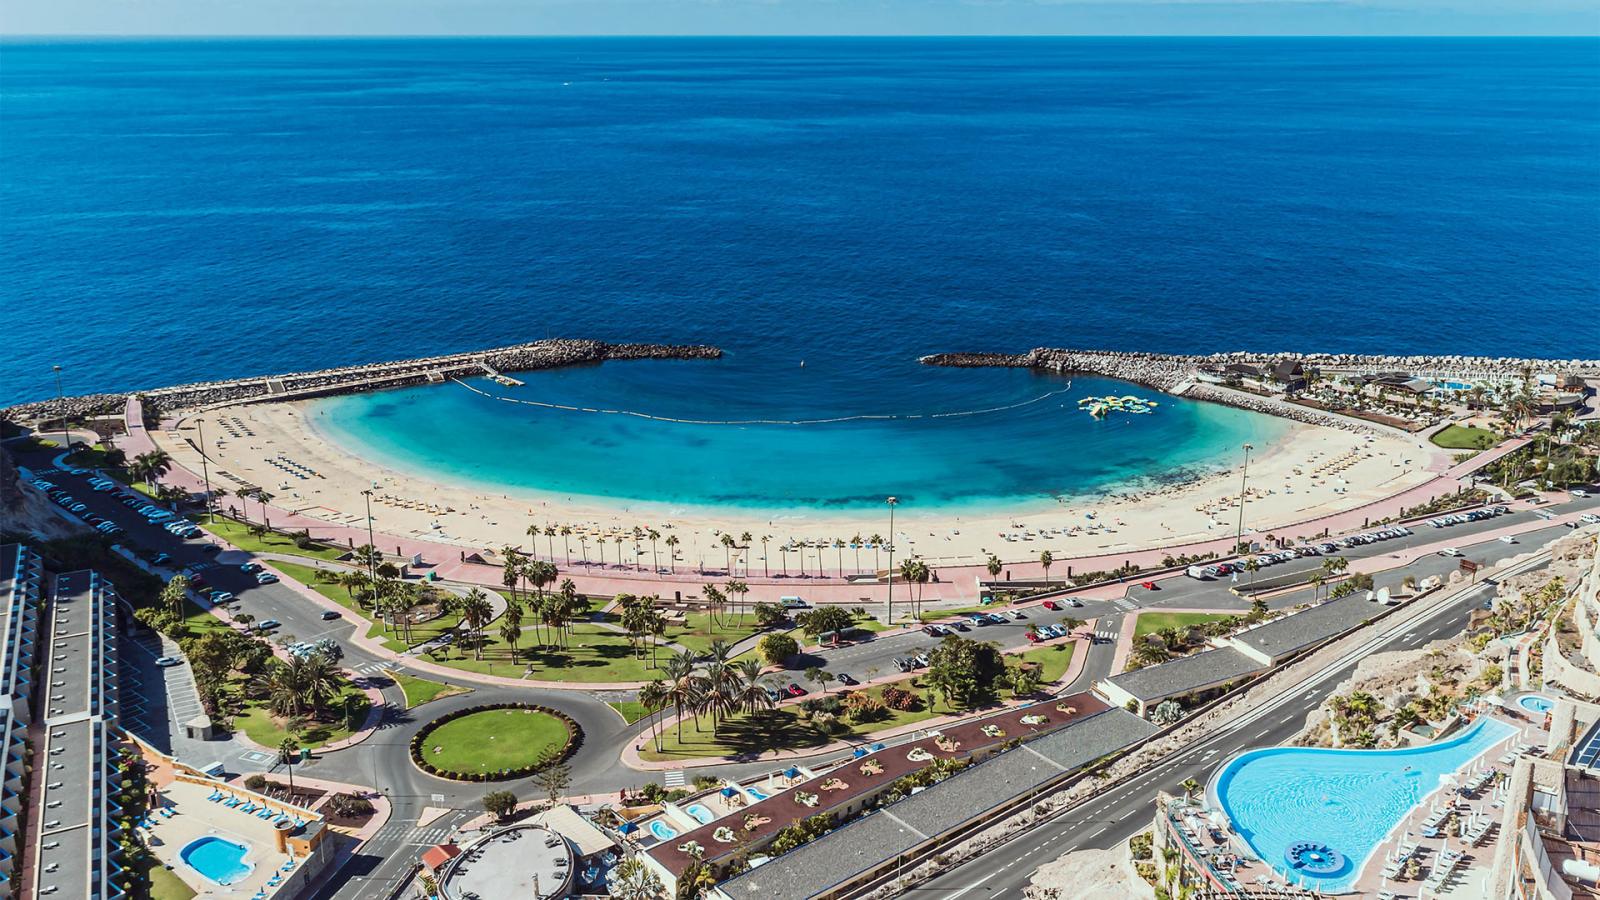 The Best Beaches of Gran Canaria Hello Canary Islands